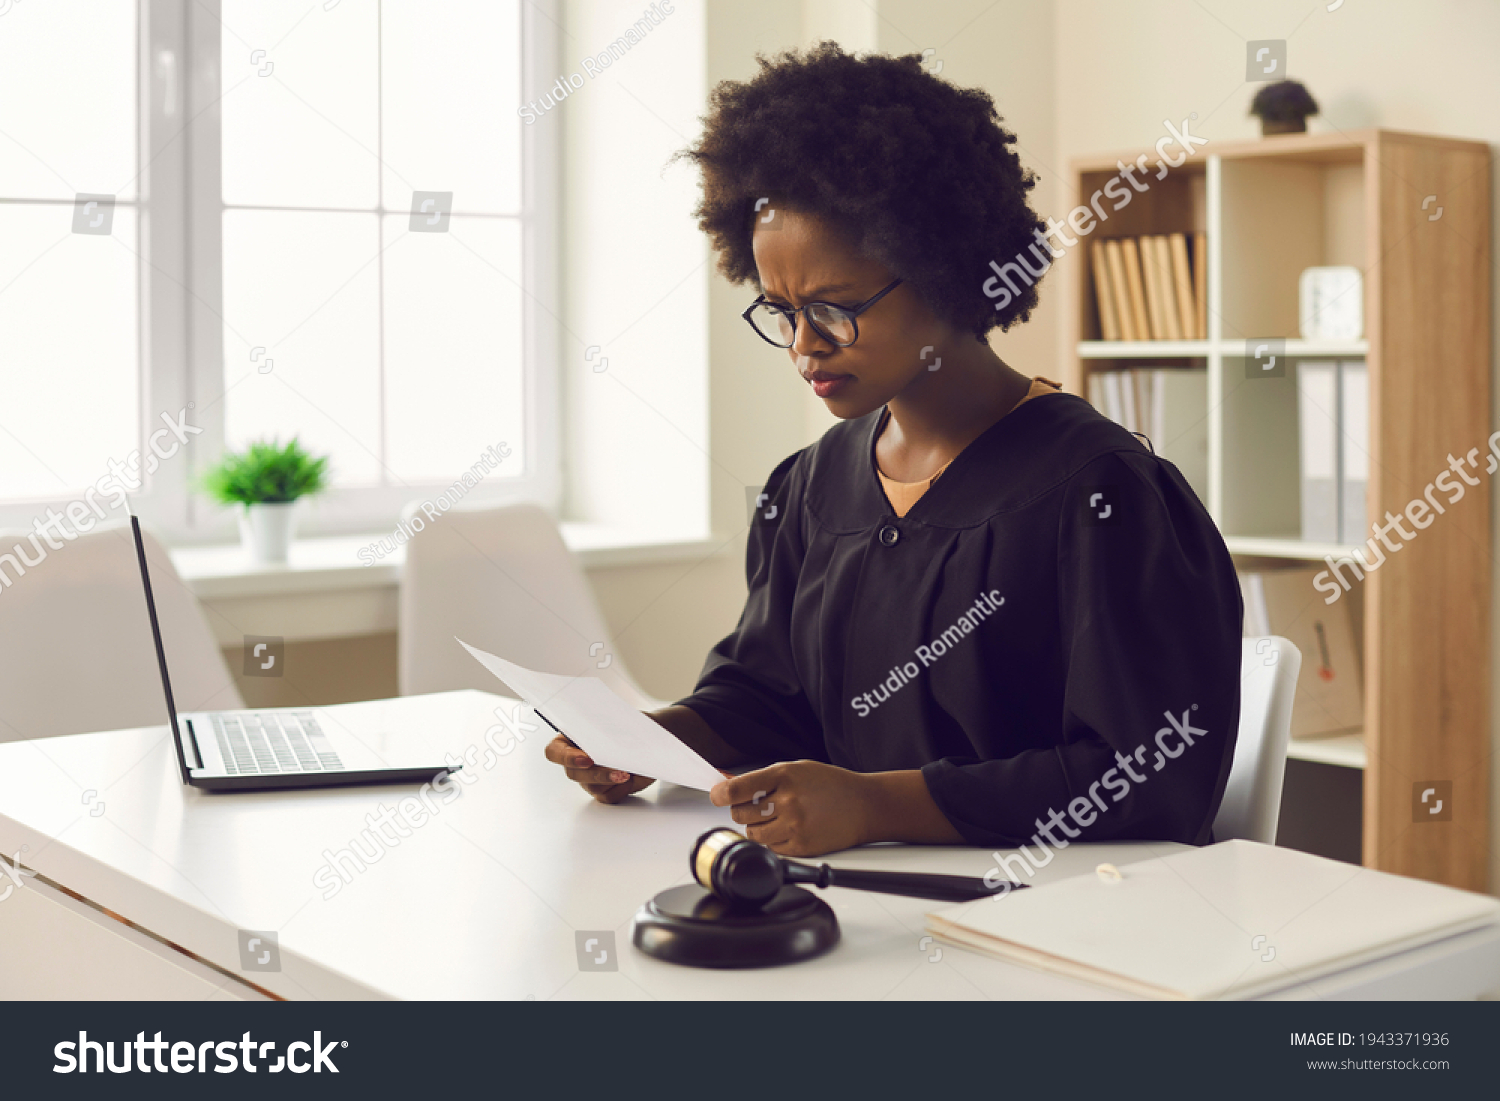 Frowning young african american female judge reading paper document sitting at desk front of laptop in courtroom. Legal trial or tribunal, paperwork and criminal data or jury order investigation #1943371936